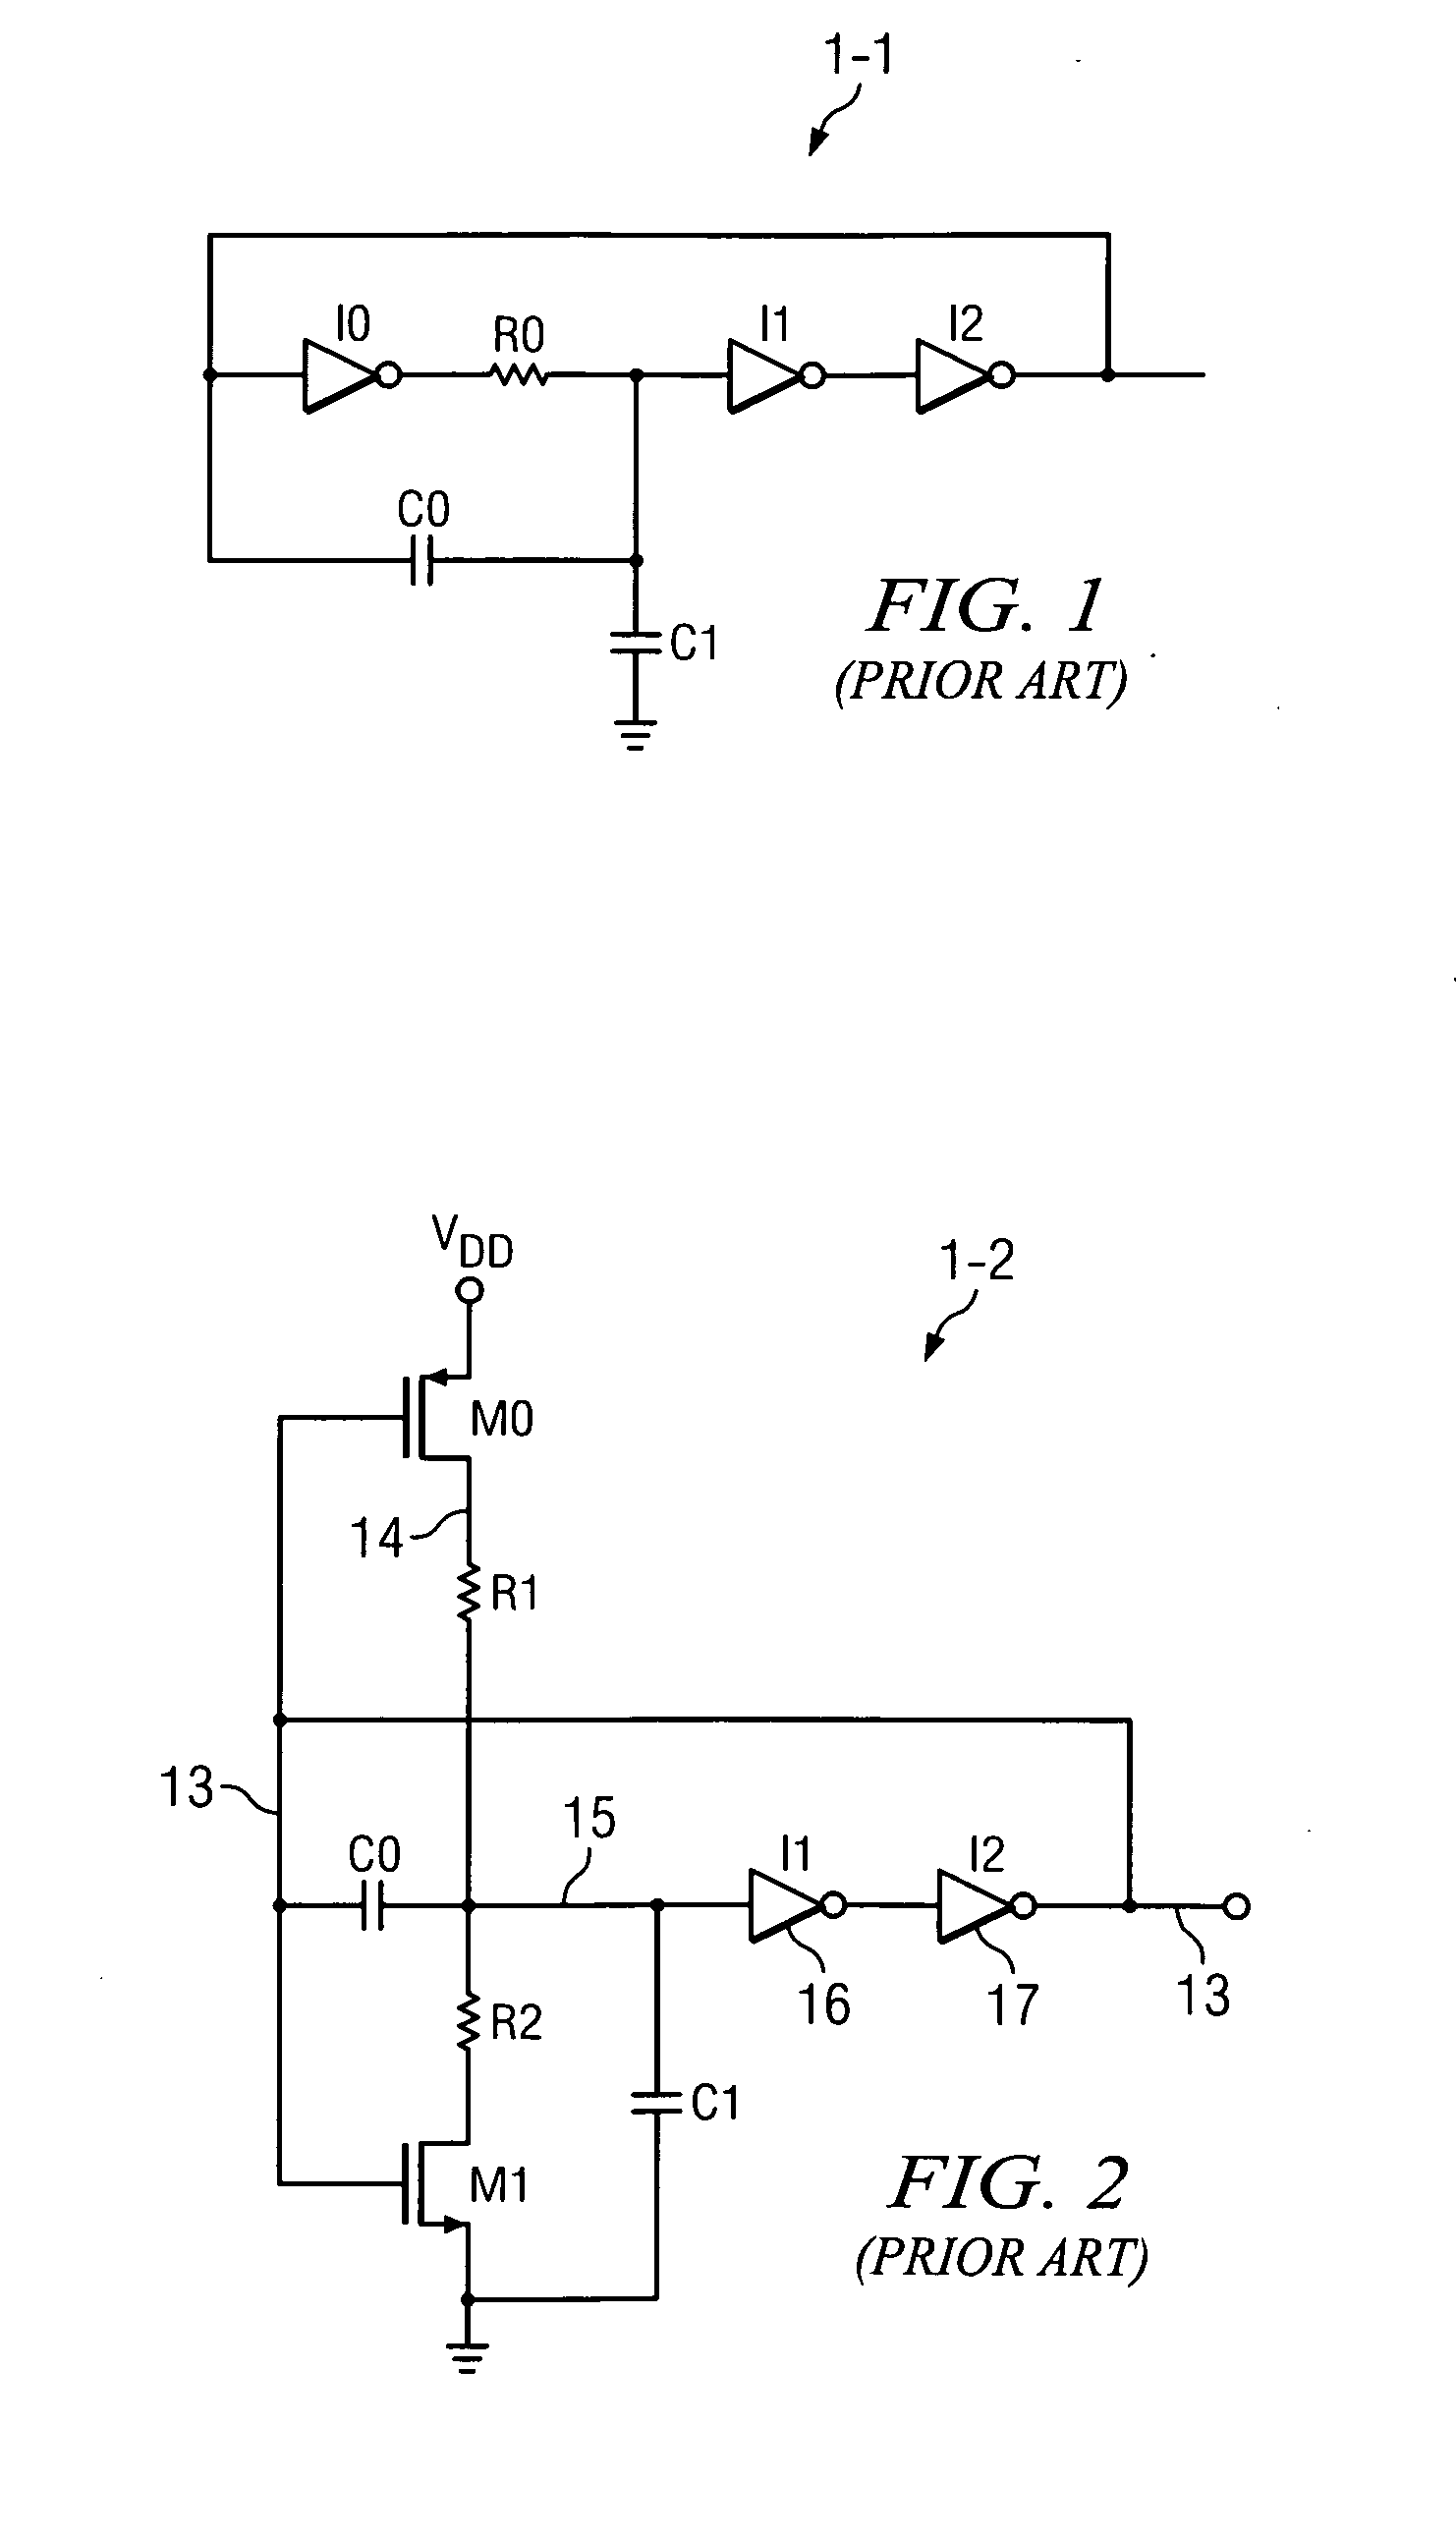 Low-voltage start up circuit and method for DC-DC boost converter